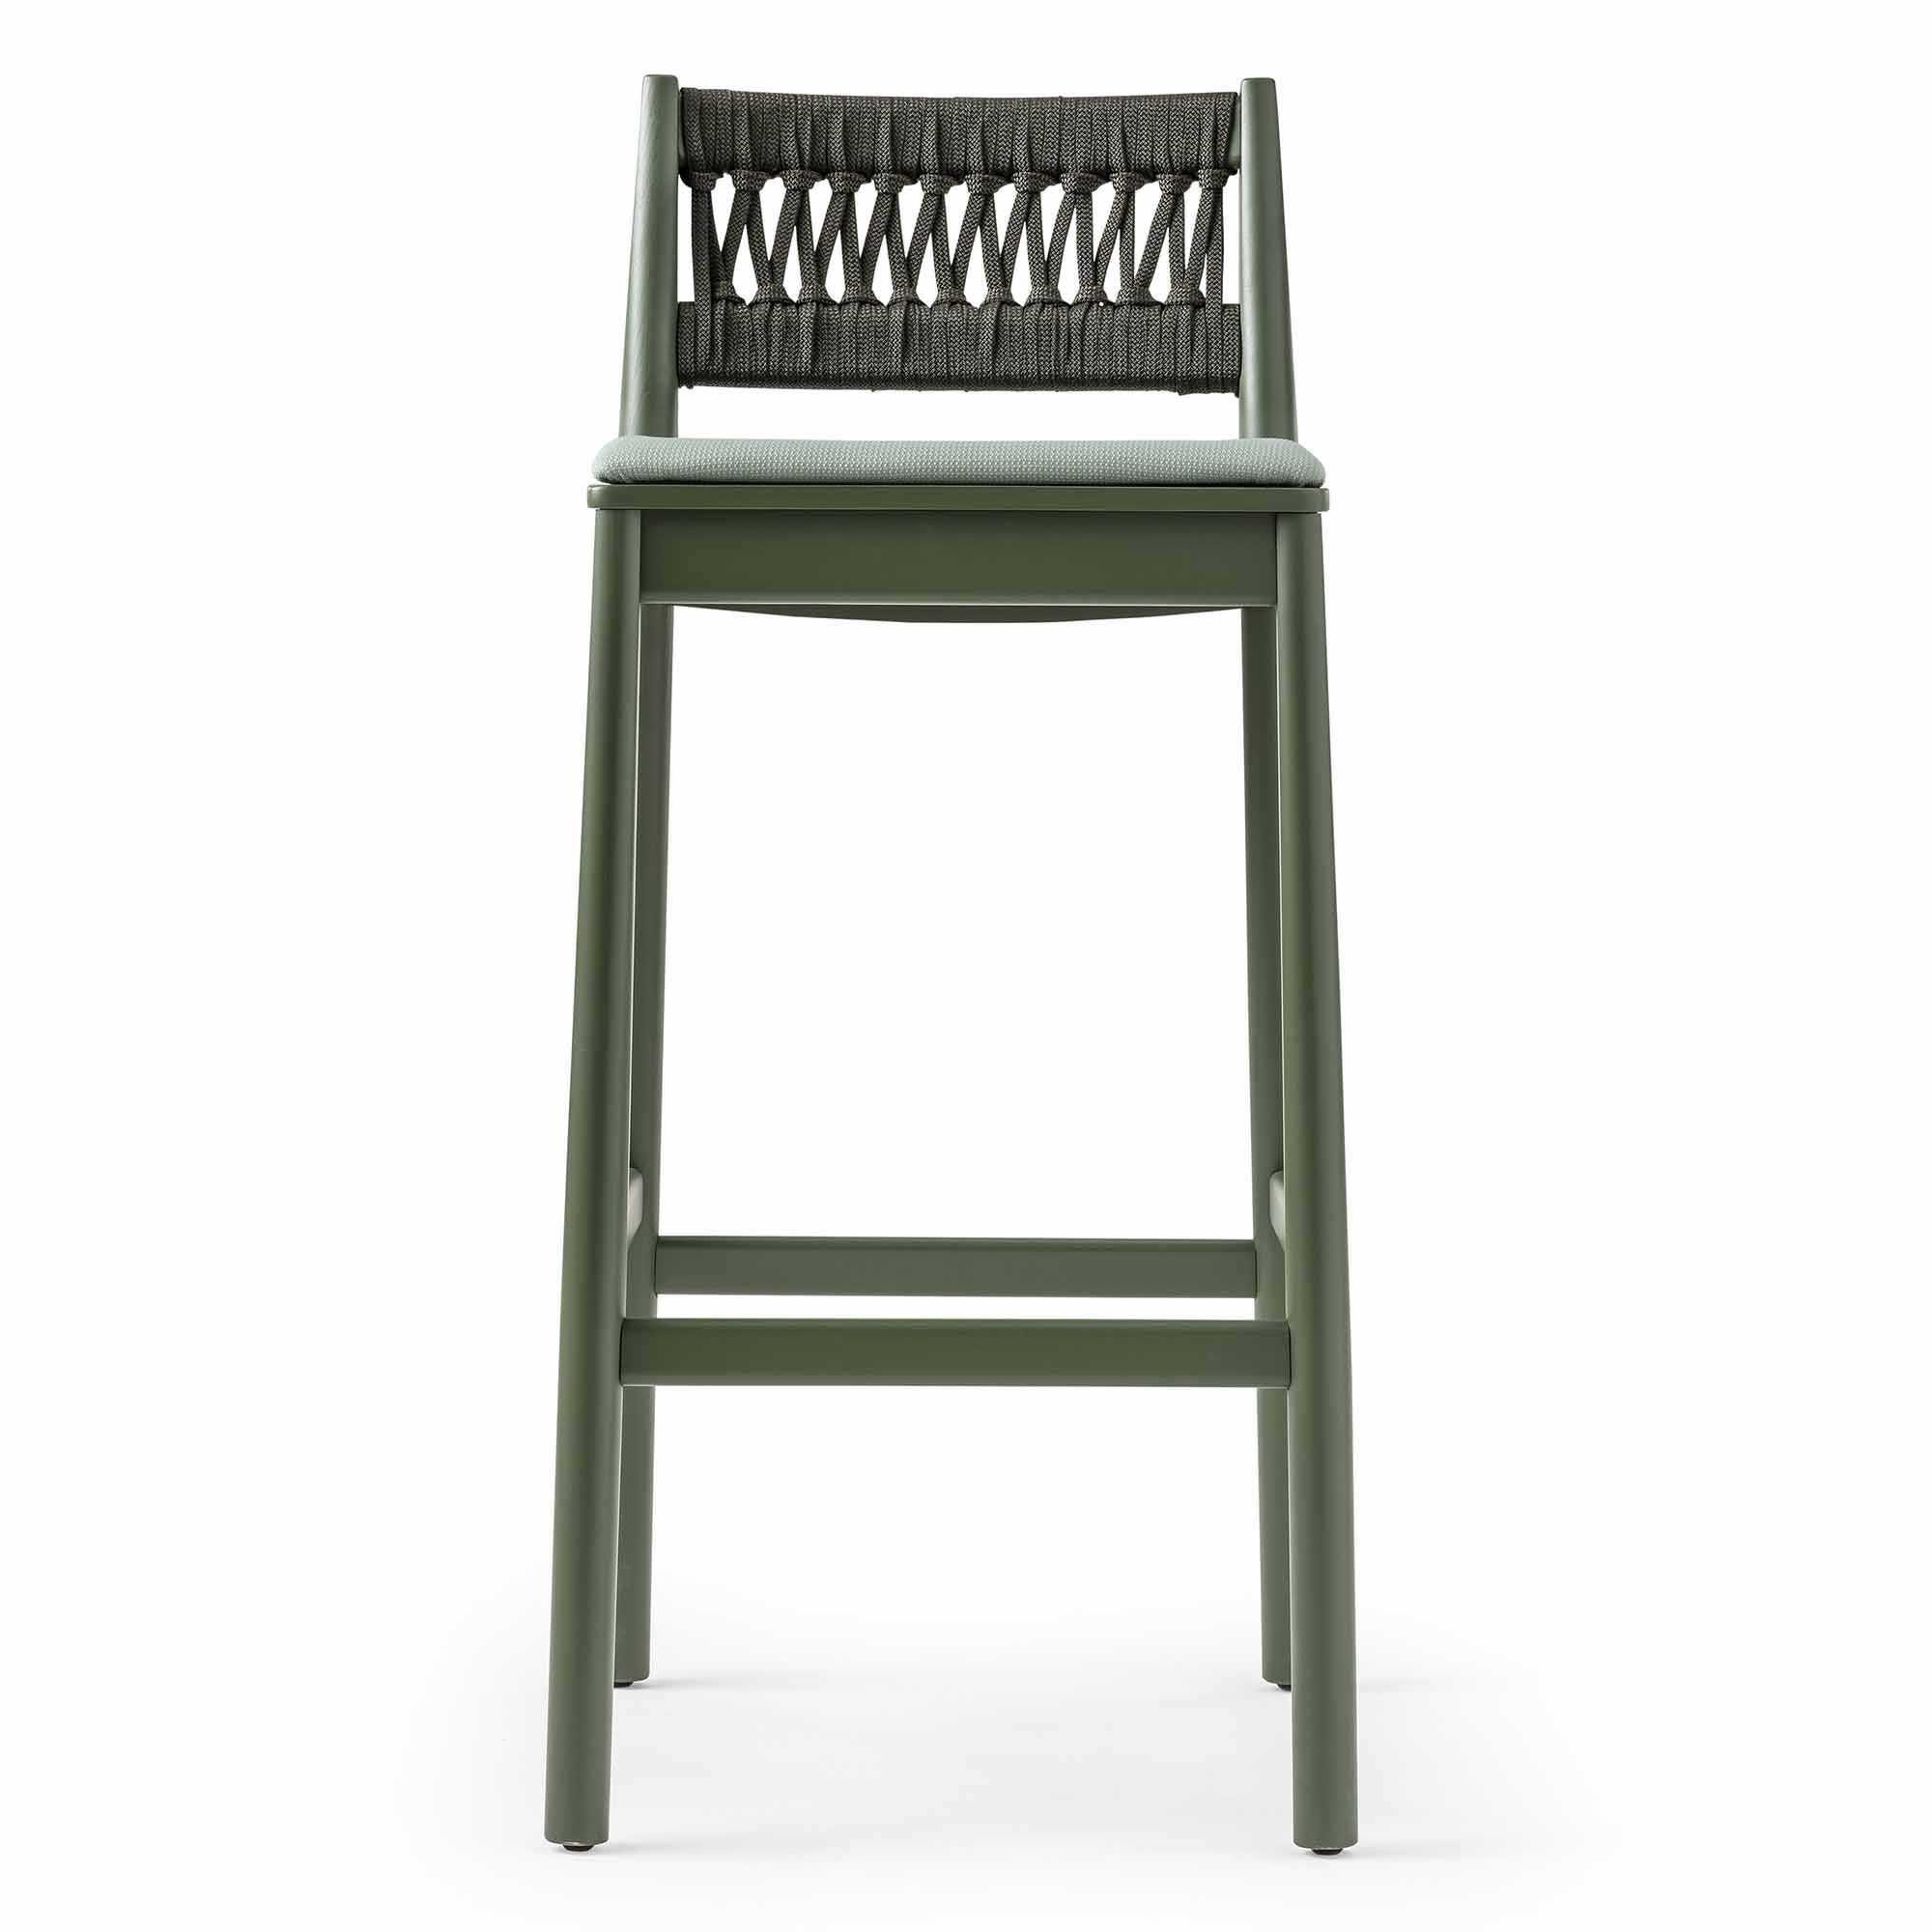 JULIE IN Stool green frame and backrest with padded